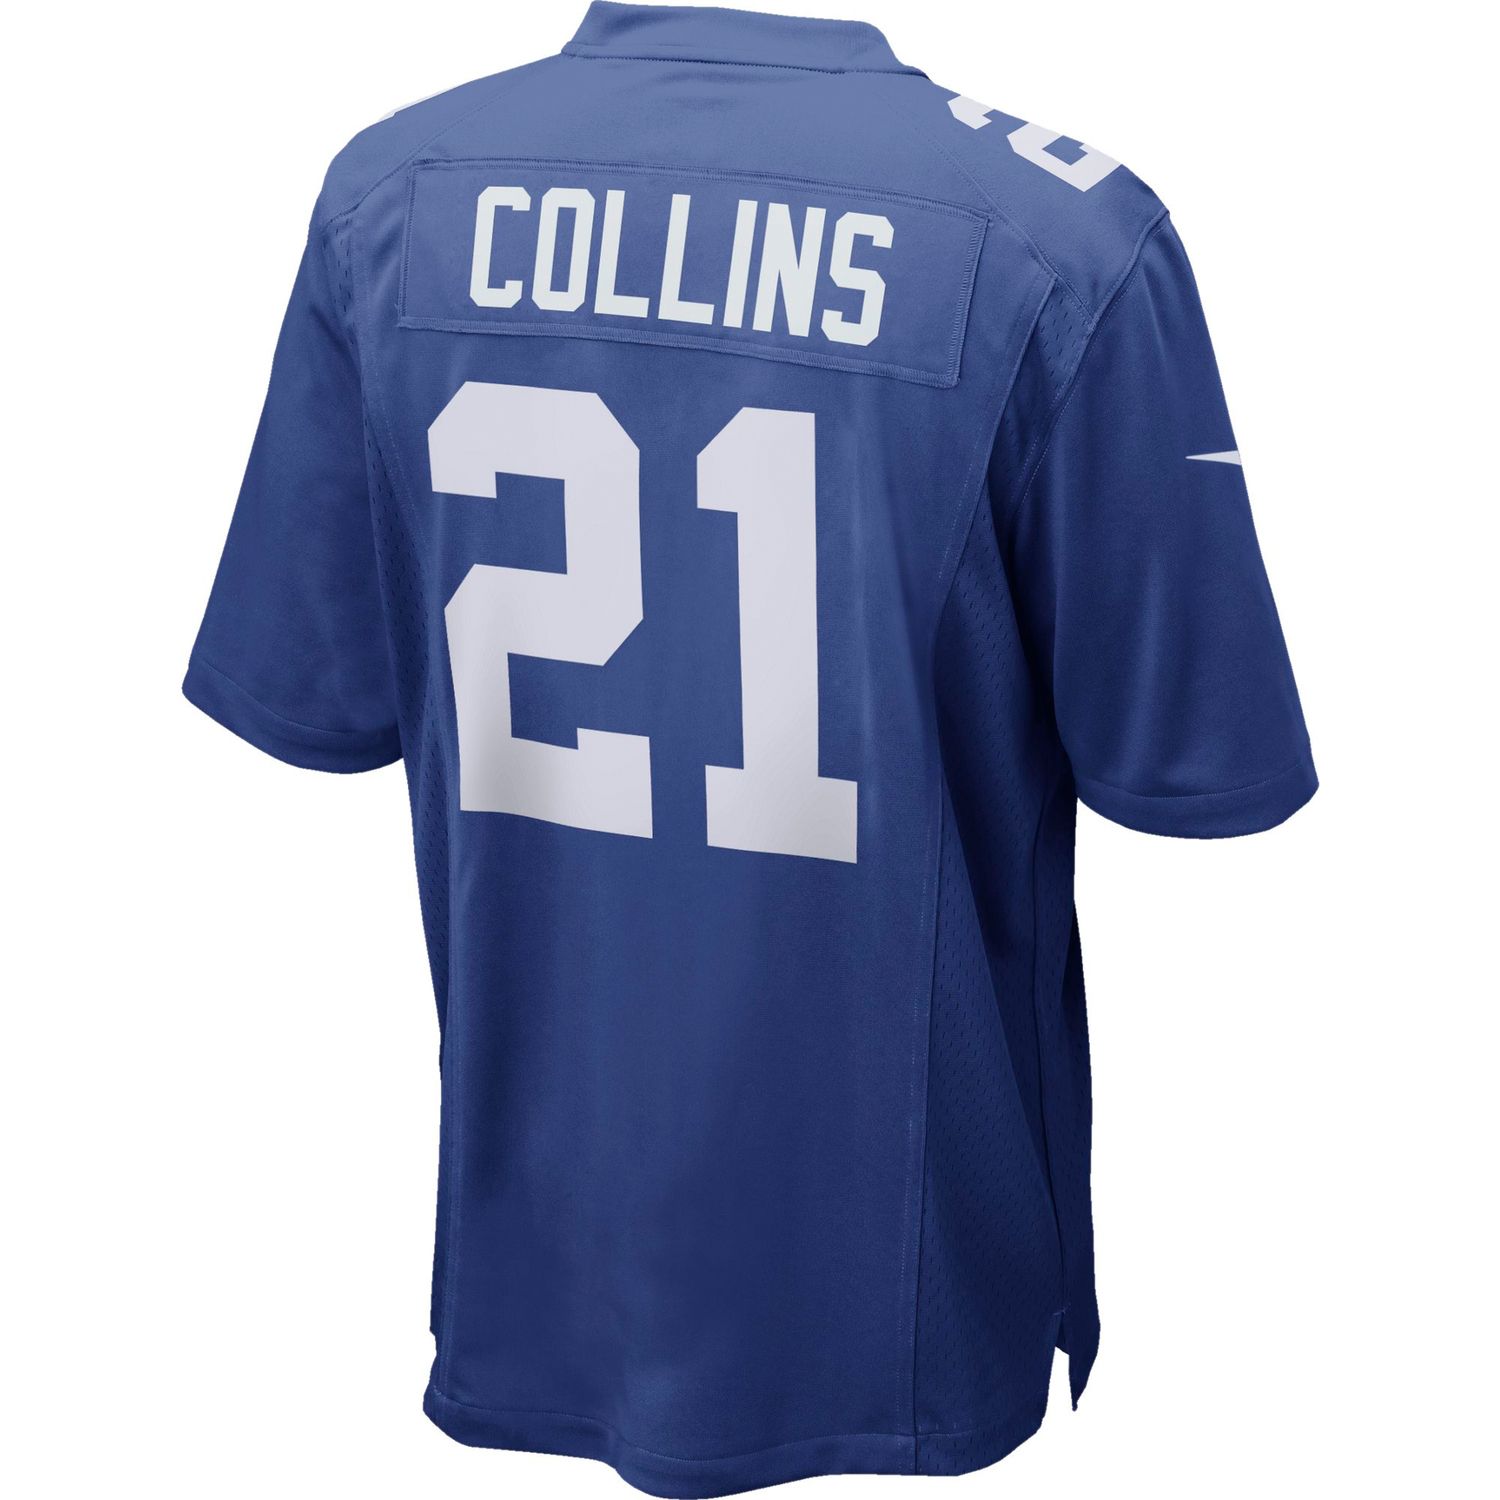 collins giants jersey